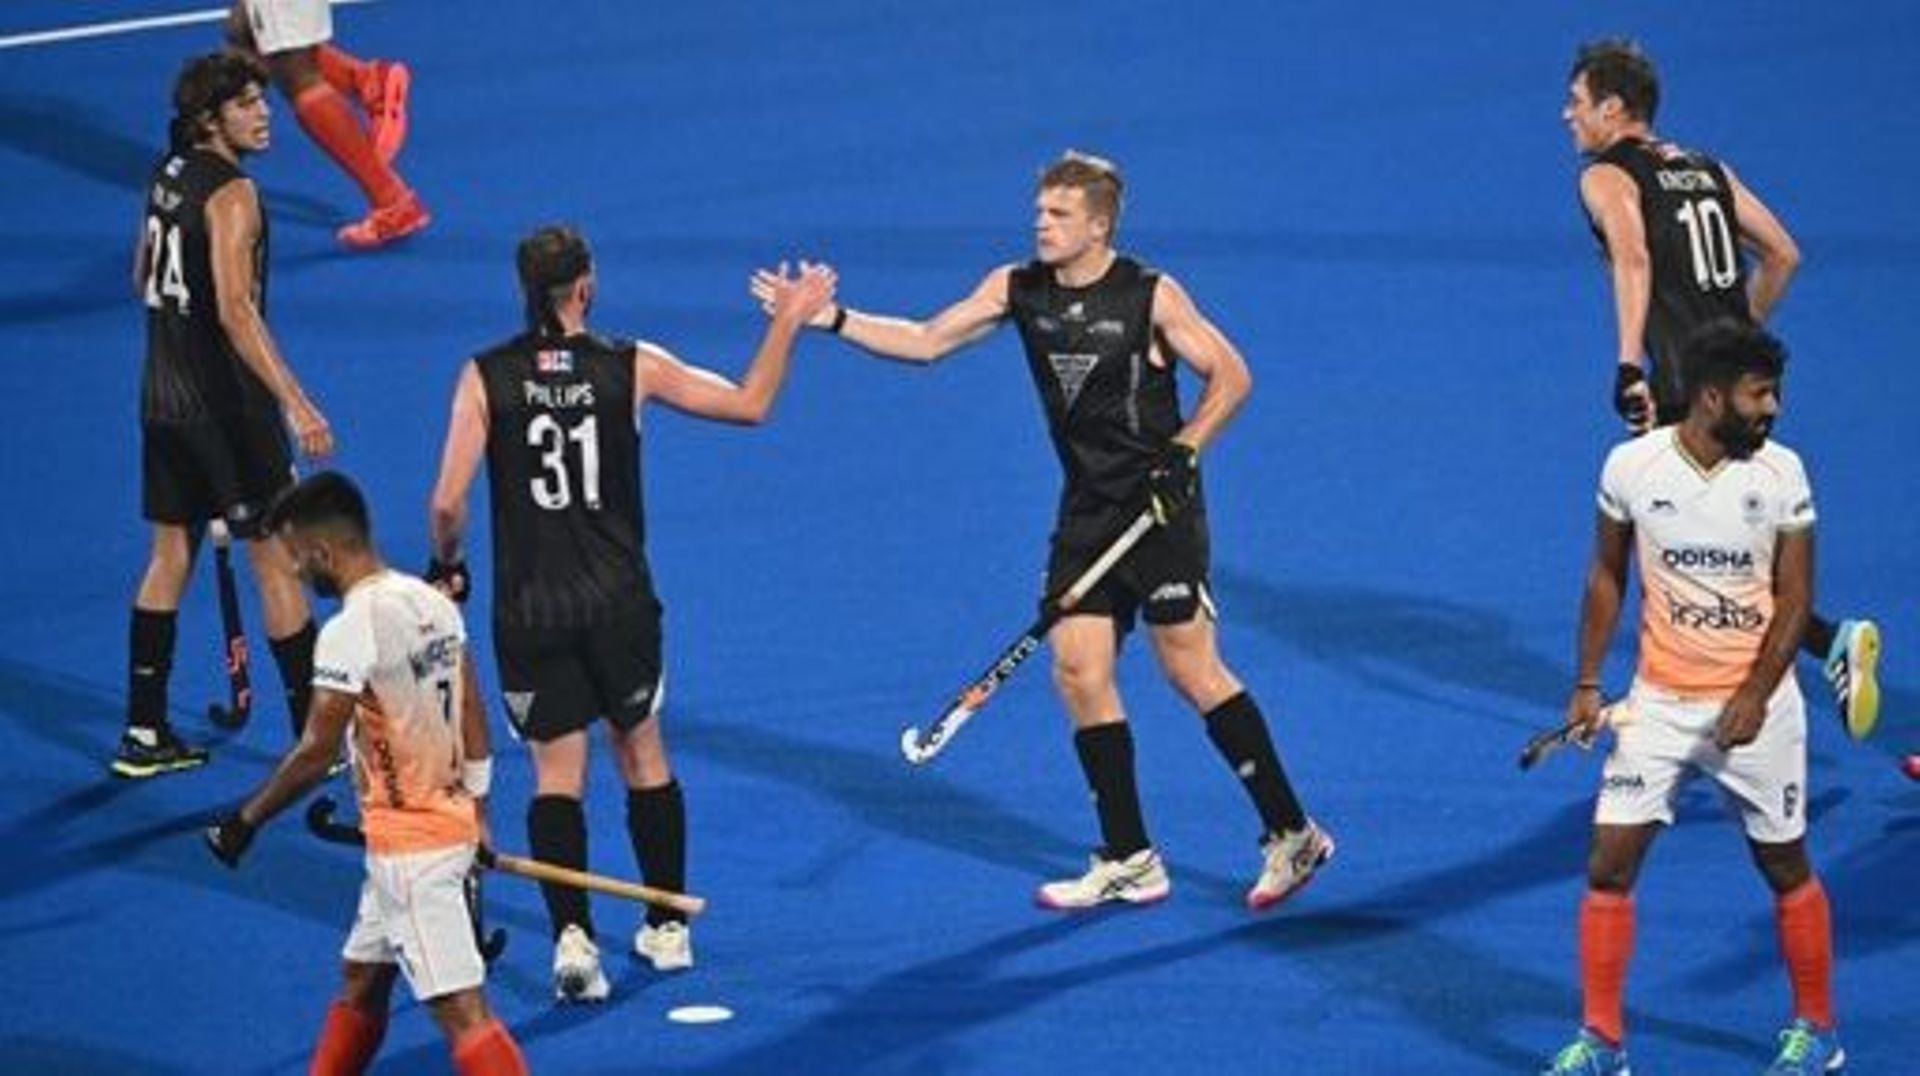 New Zealand’s Sam Lane celebrates after scoring during a game between India and New Zealand, a crossover game at the 2023 Men’s FIH Hockey World Cup in Bhubaneswar, India, Sunday 22 January 2023. BELGA PHOTO DIRK WAEM